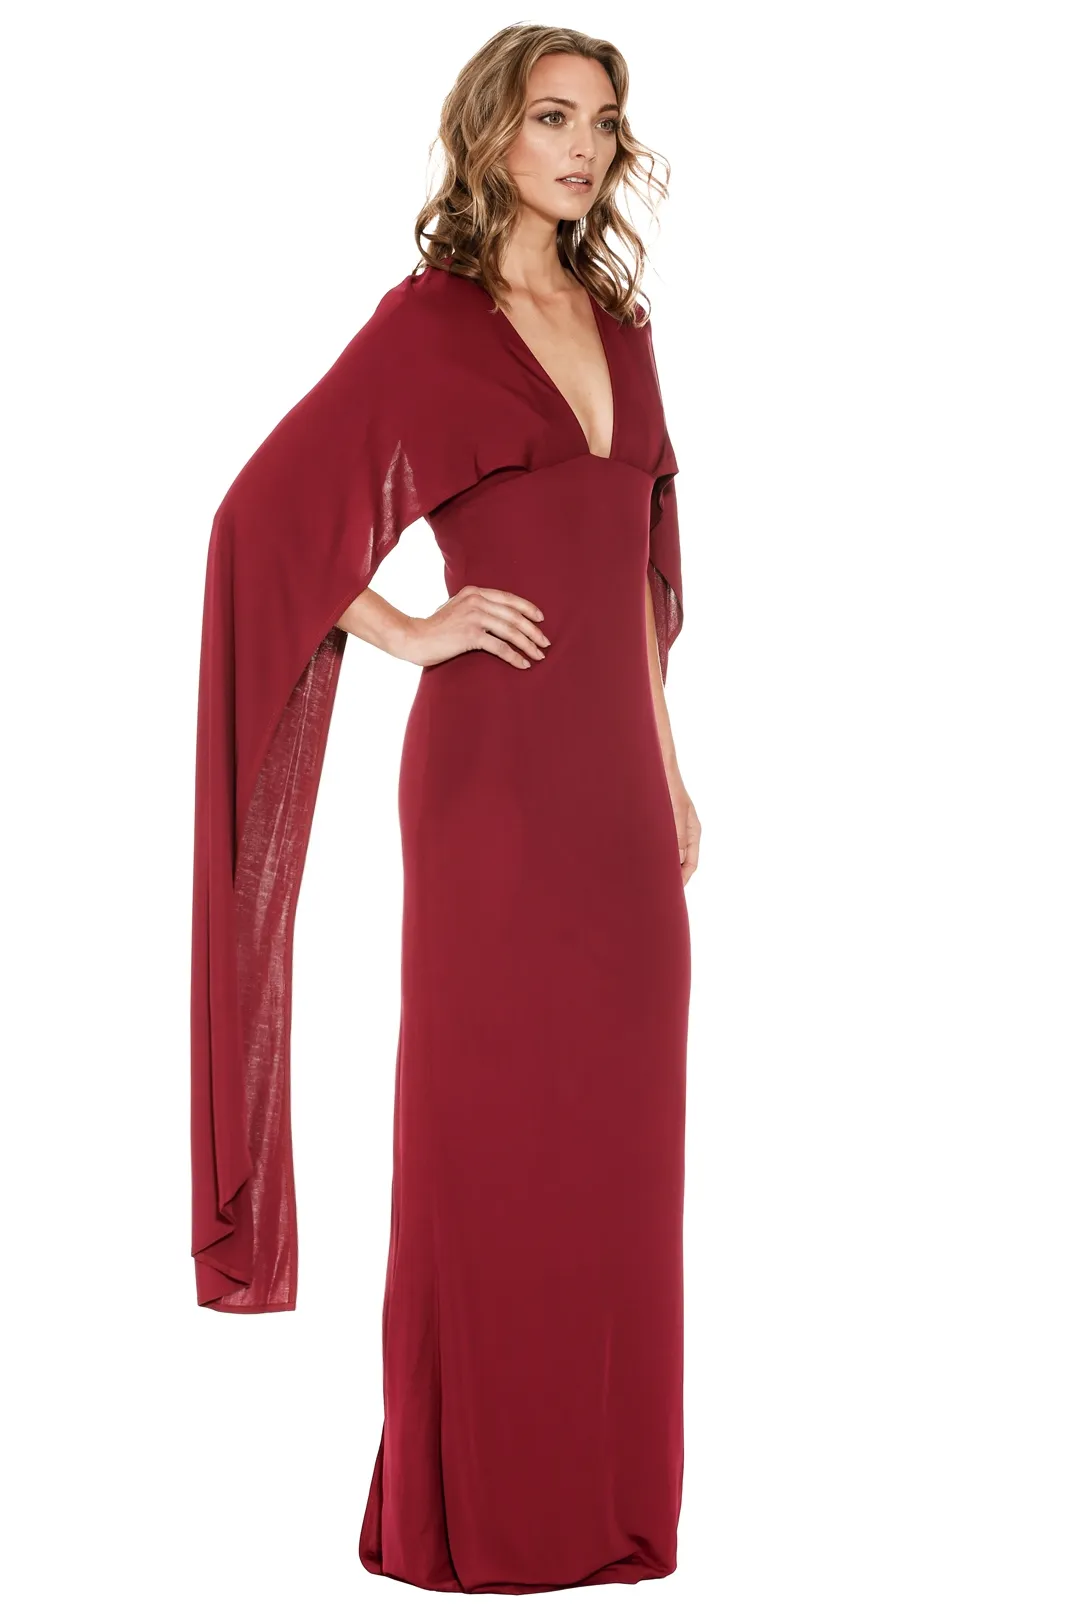 Formal Cyra Deep V Cape Gown available for hire